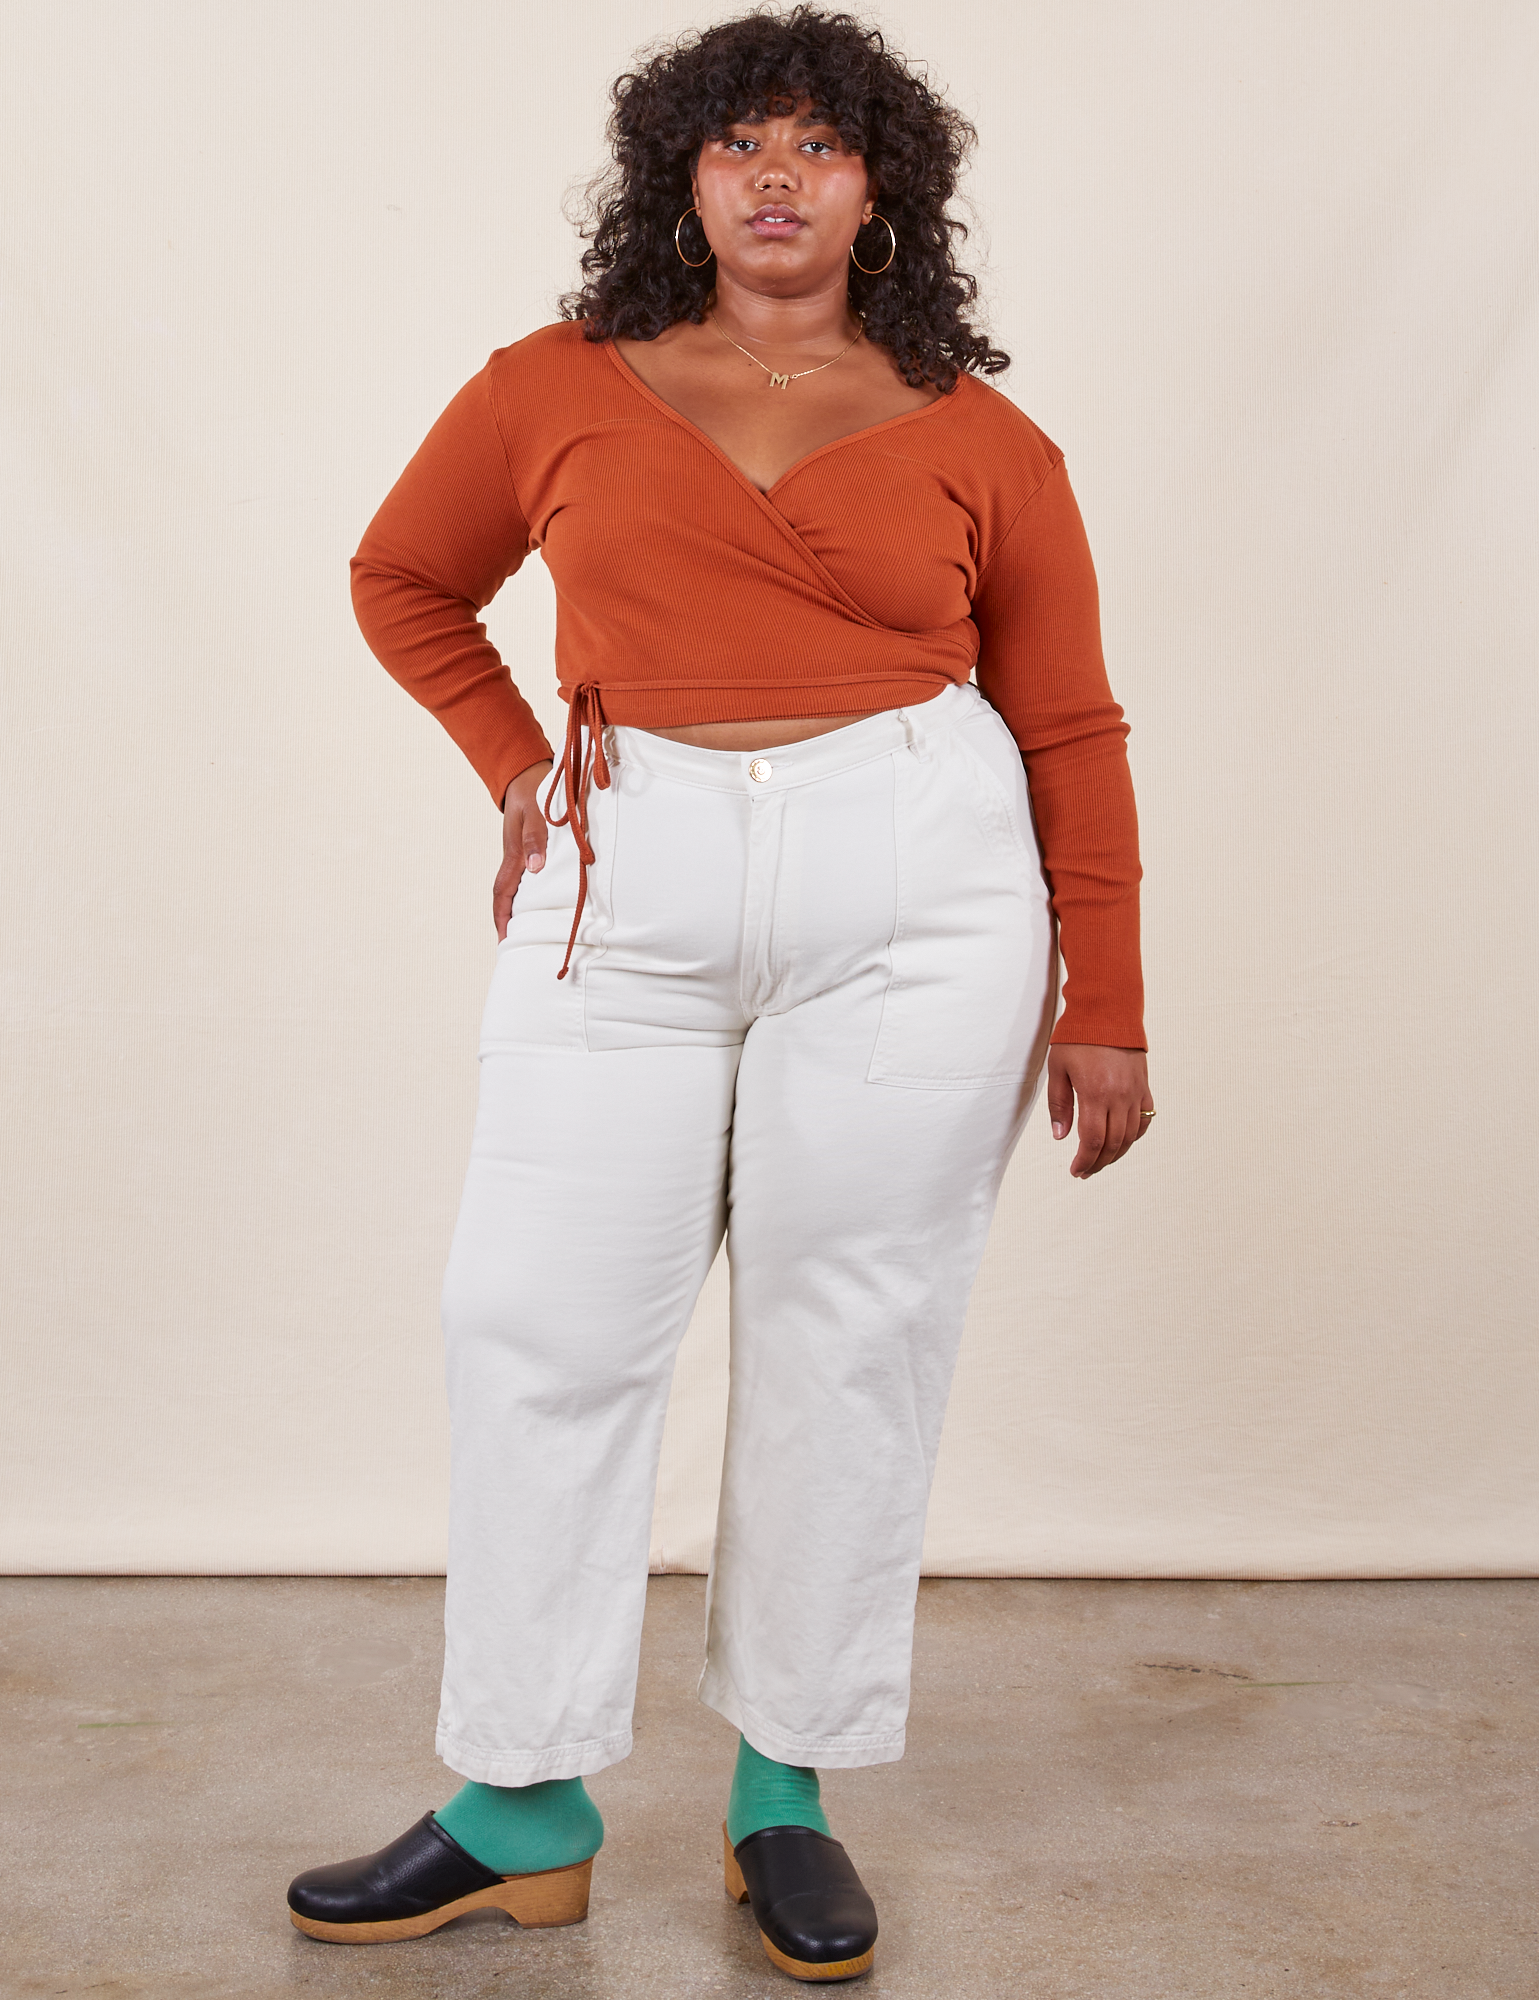 Morgan is 5&#39;5&quot; and wearing Petite 1XL Work Pants in Vintage Off-White paired with burnt terracotta Wrap Top